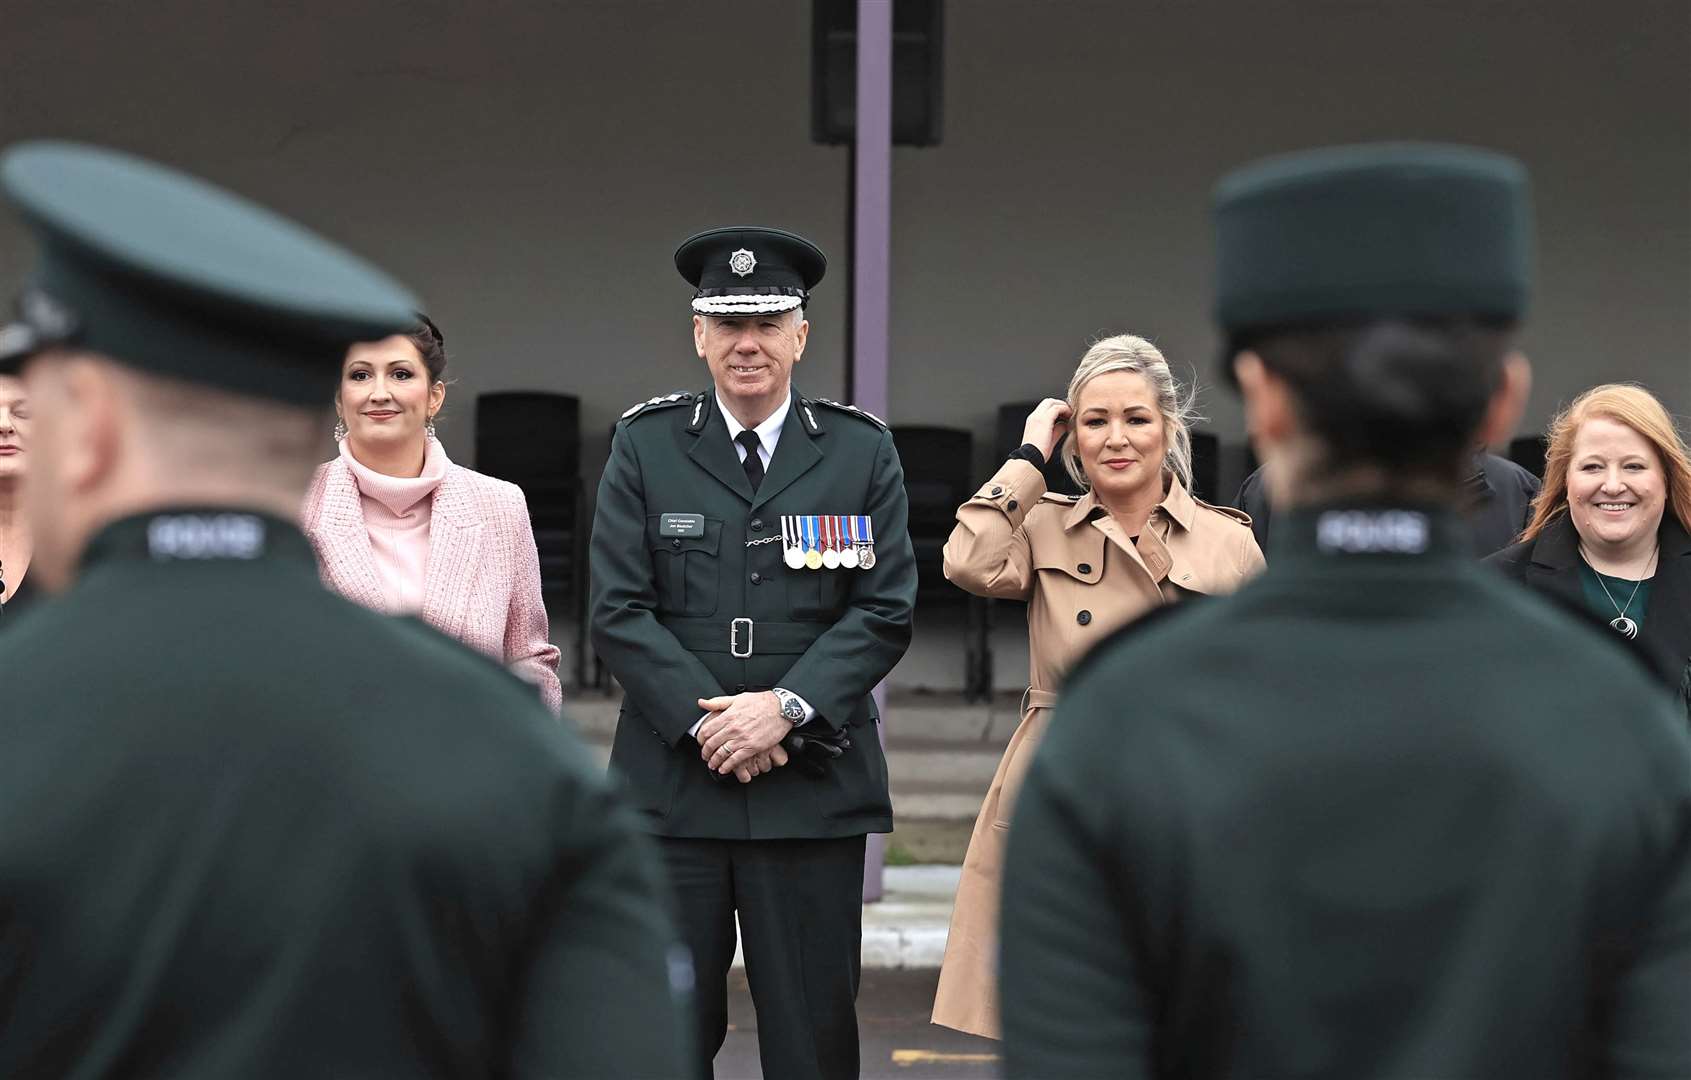 DUP deputy First Minister Emma Little-Pengelly, Chief Constable Jon Boutcher, First Minister Michelle O’Neill and Justice minister Naomi Long attending a PSNI graduation ceremony (Liam McBurney/PA)